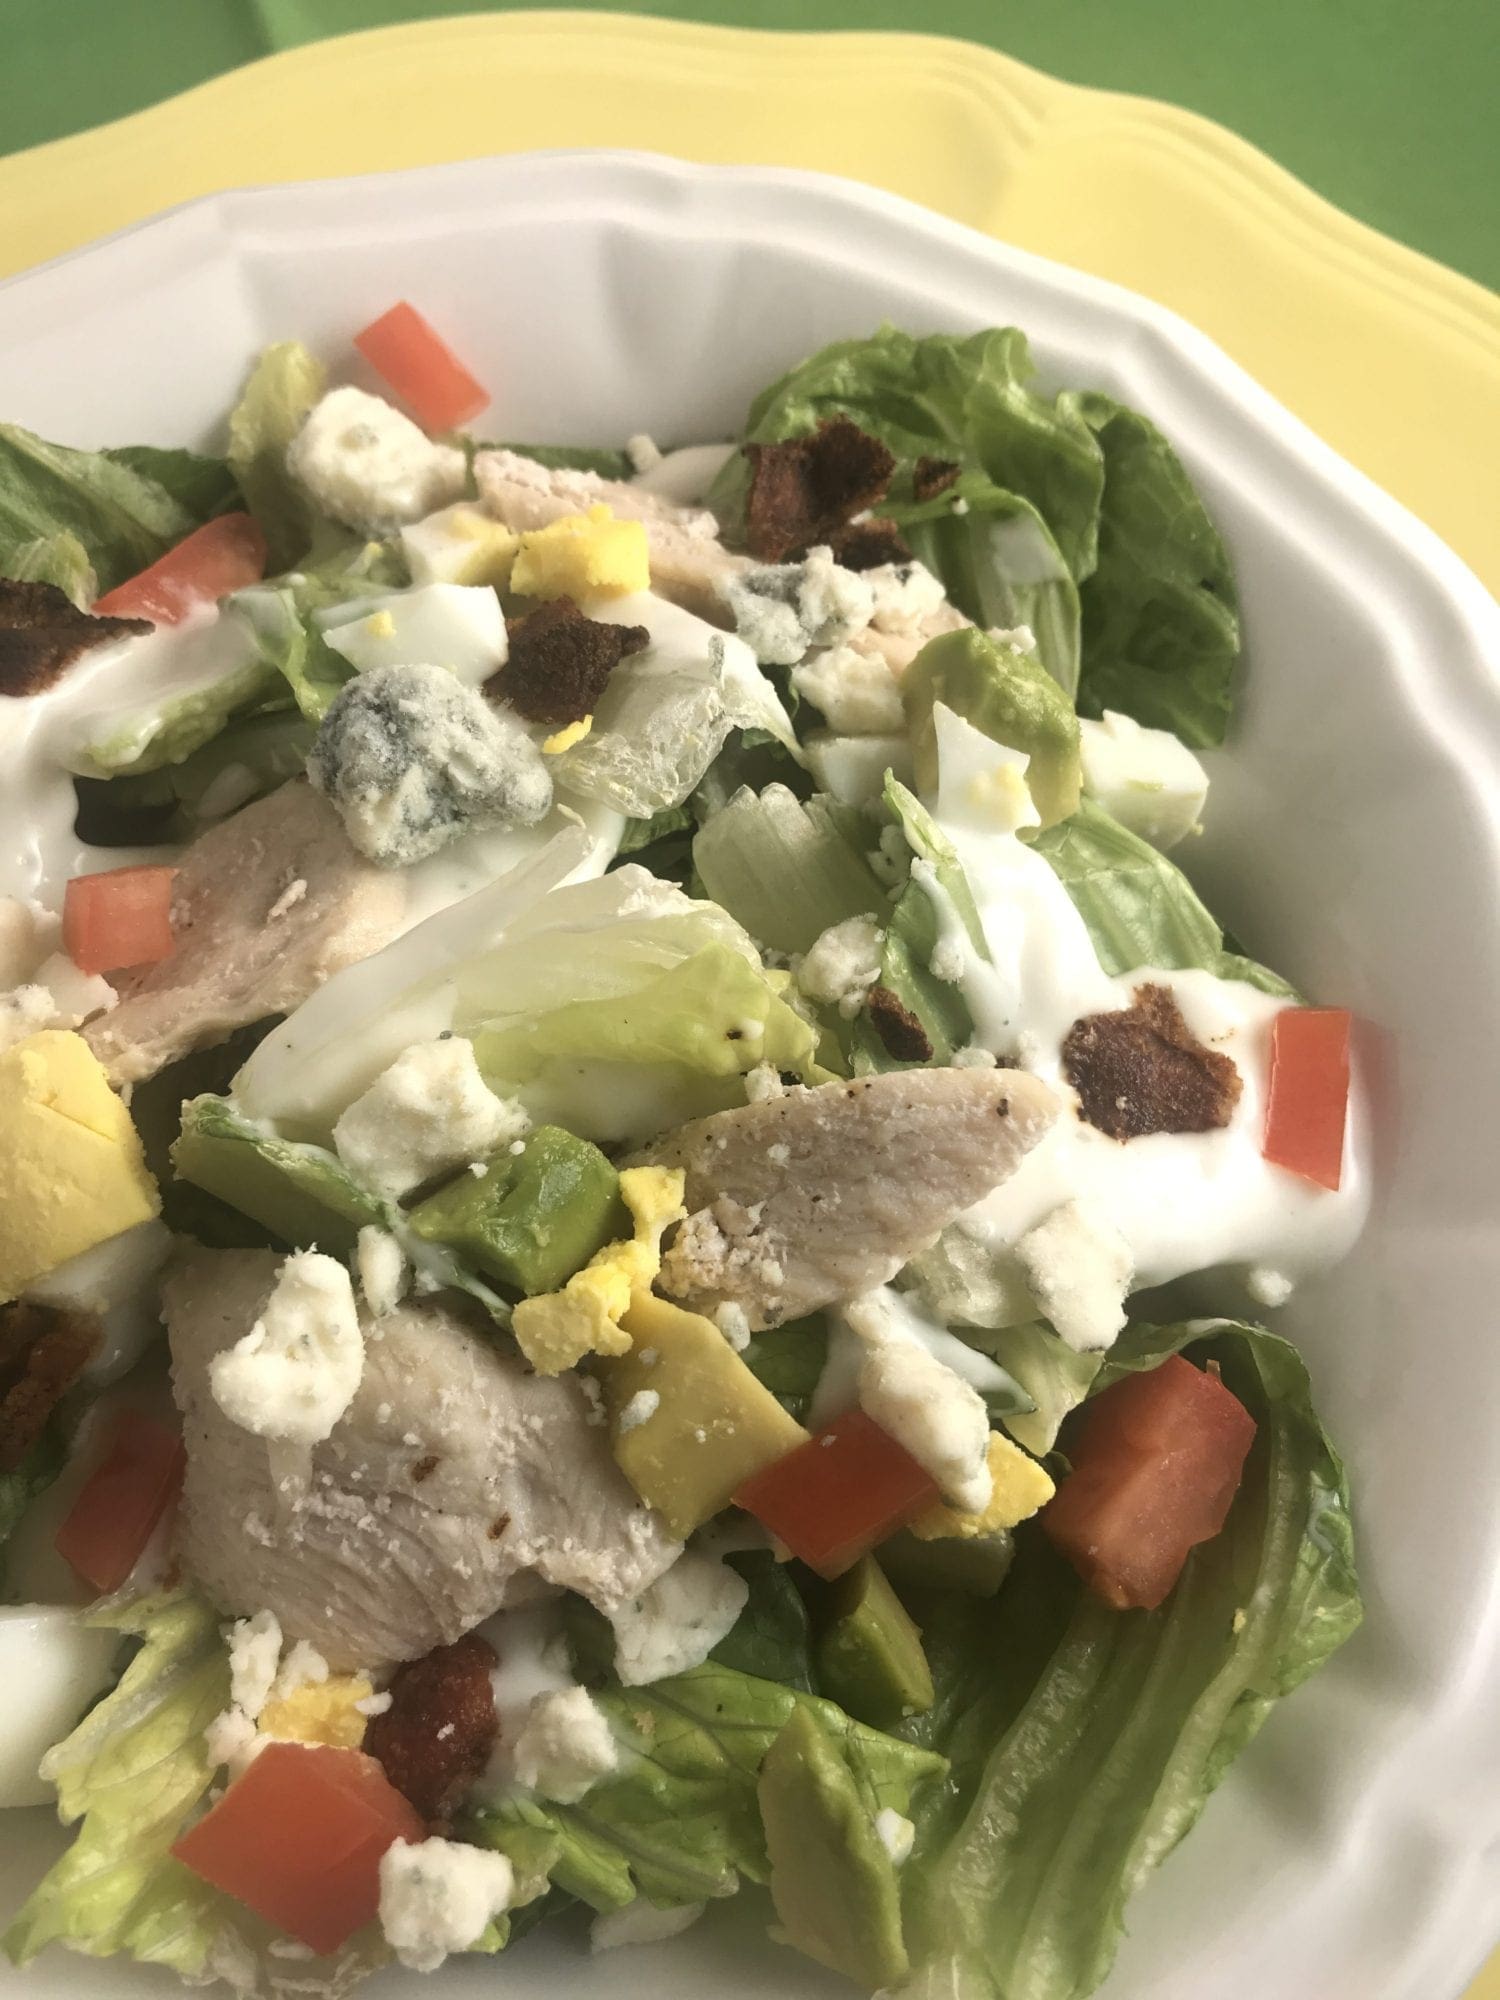 Weight Watchers friendly California Cobb Salad on Meal Planning Mommies - Just 5 WW SP per generous 2 cup serving!